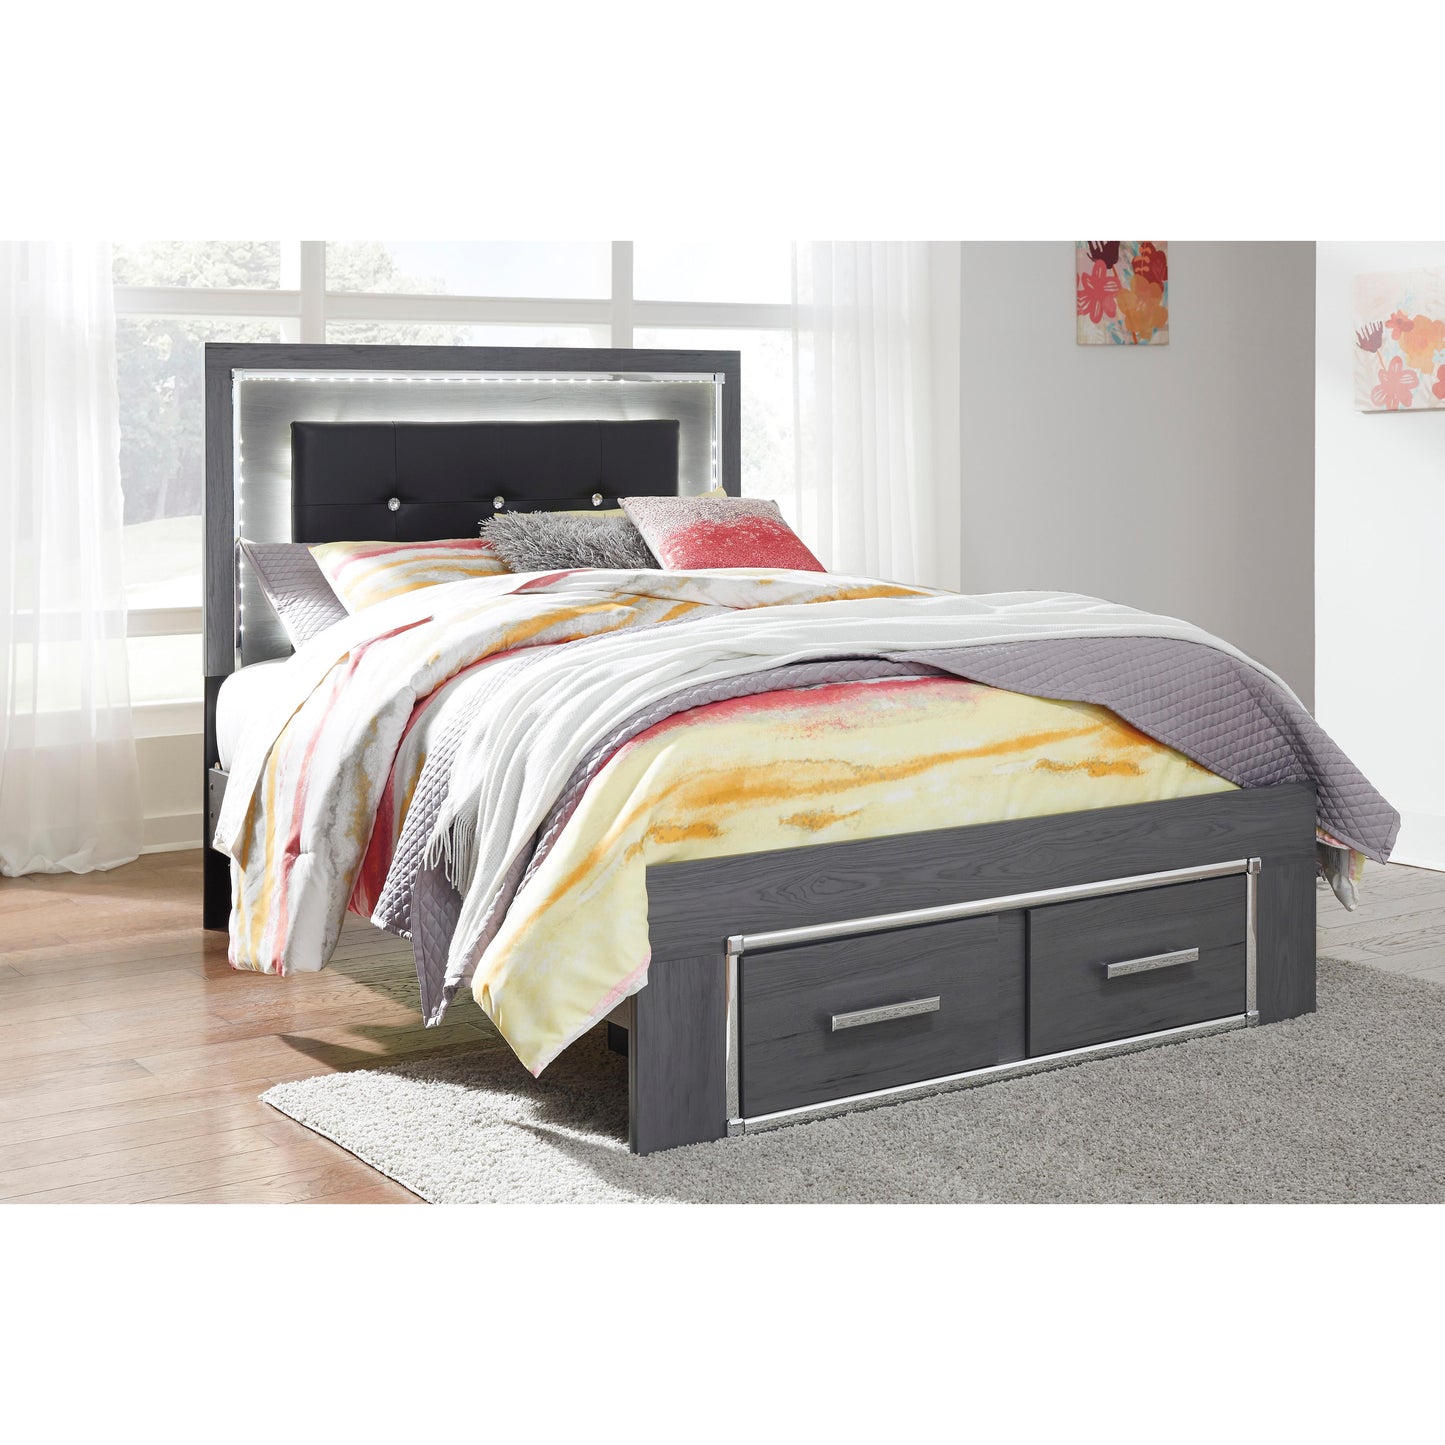 Signature Design by Ashley Kids Beds Bed B214-87/B214-84S/B214-86